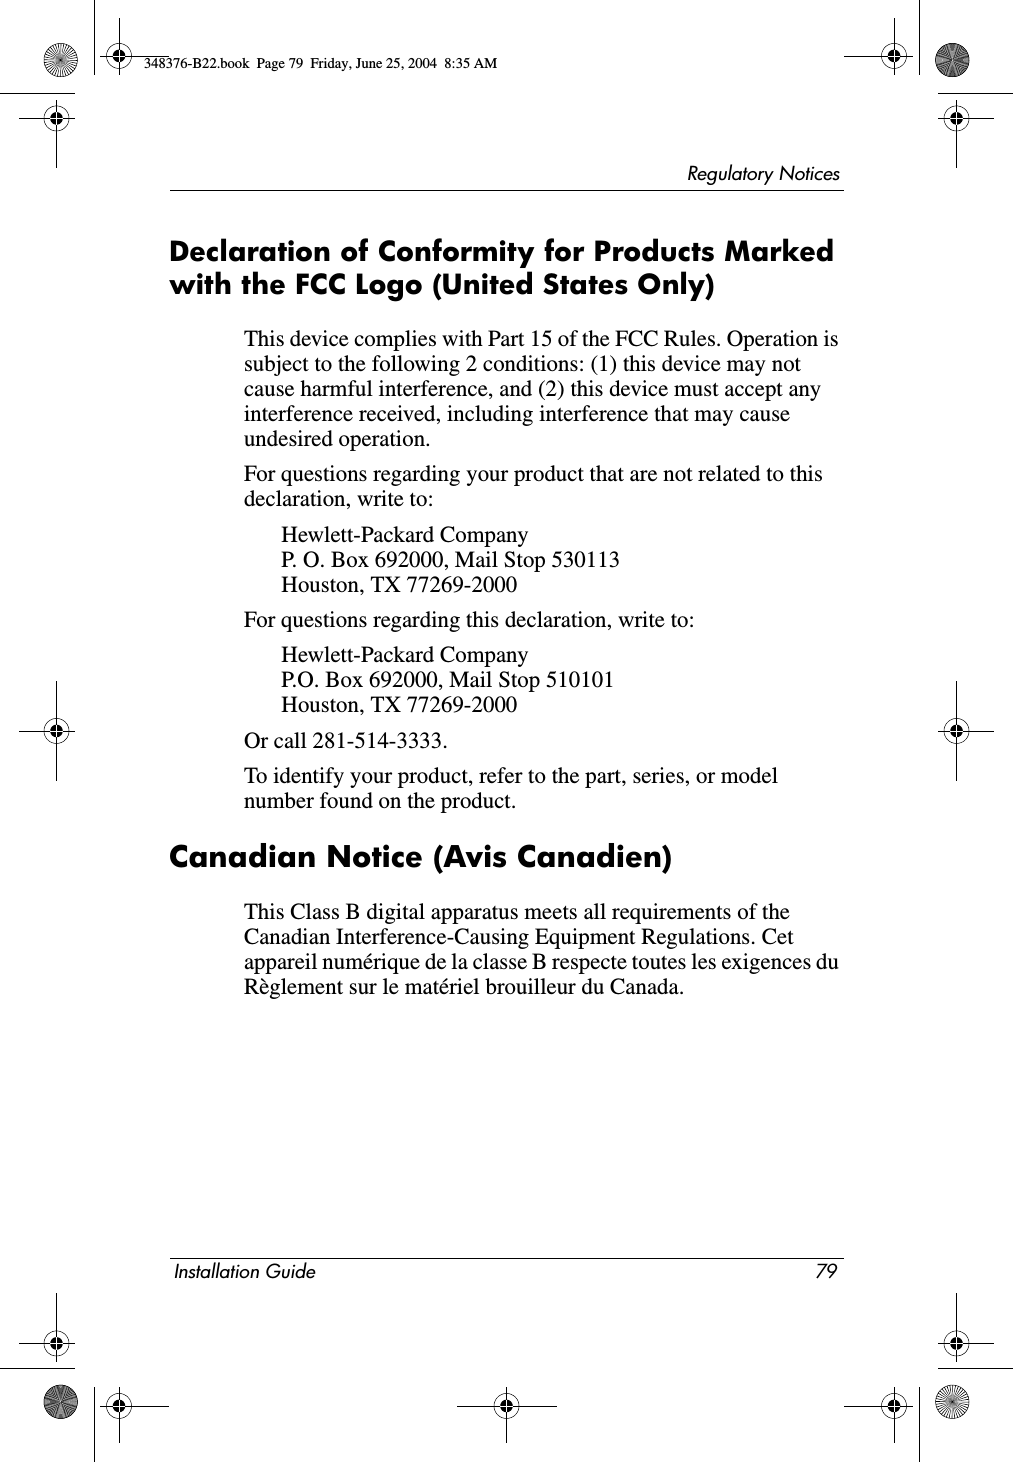 Regulatory NoticesInstallation Guide 79Declaration of Conformity for Products Marked with the FCC Logo (United States Only)This device complies with Part 15 of the FCC Rules. Operation is subject to the following 2 conditions: (1) this device may not cause harmful interference, and (2) this device must accept any interference received, including interference that may cause undesired operation.For questions regarding your product that are not related to this declaration, write to:Hewlett-Packard CompanyP. O. Box 692000, Mail Stop 530113Houston, TX 77269-2000For questions regarding this declaration, write to:Hewlett-Packard CompanyP.O. Box 692000, Mail Stop 510101Houston, TX 77269-2000Or call 281-514-3333.To identify your product, refer to the part, series, or model number found on the product.Canadian Notice (Avis Canadien)This Class B digital apparatus meets all requirements of the Canadian Interference-Causing Equipment Regulations. Cet appareil numérique de la classe B respecte toutes les exigences du Règlement sur le matériel brouilleur du Canada.348376-B22.book  Page 79  Friday, June 25, 2004  8:35 AM